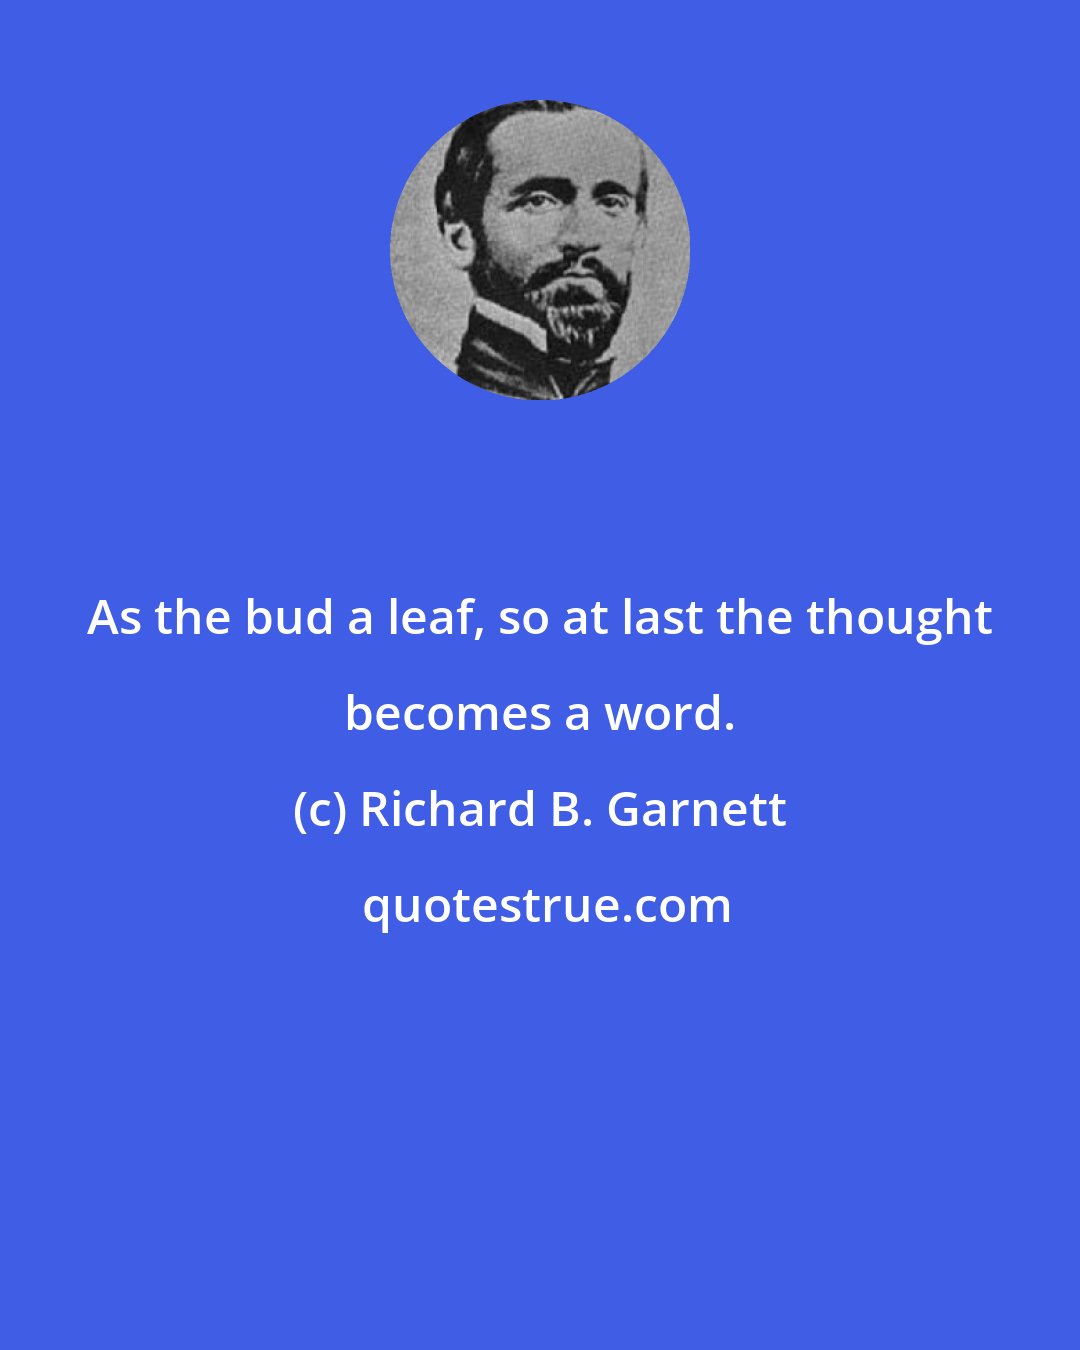 Richard B. Garnett: As the bud a leaf, so at last the thought becomes a word.